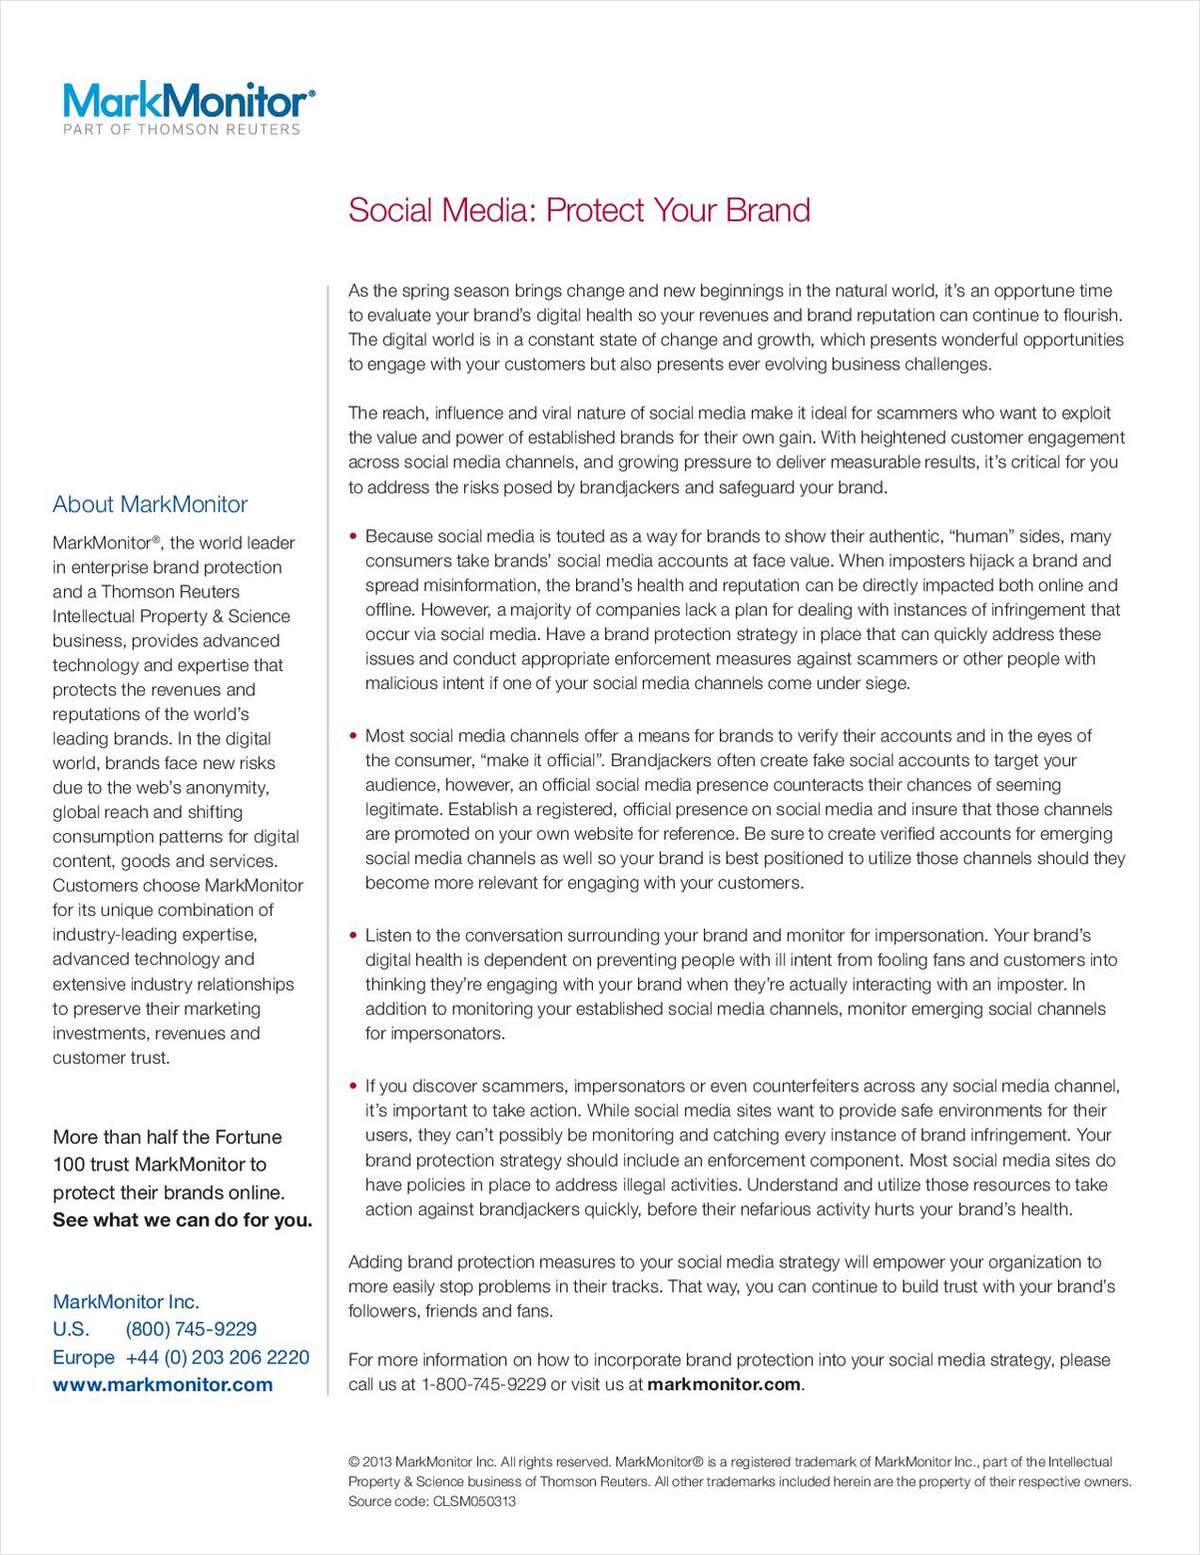 Key Strategies for Protecting Your Brand in Social Media